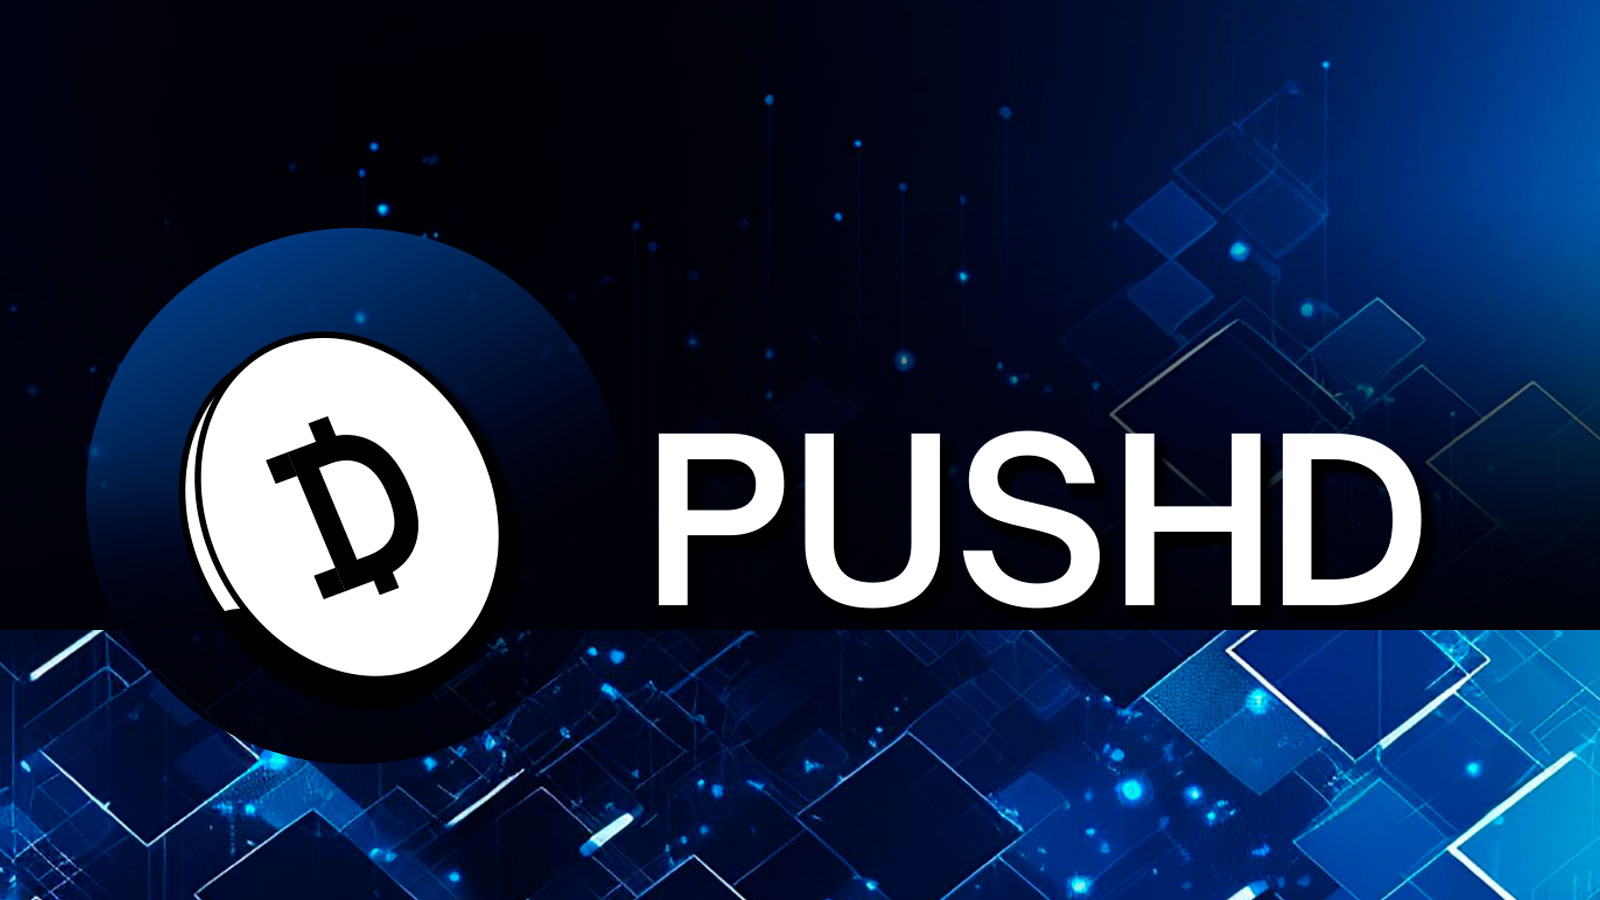 Ethereum (ETH) & Bitcoin Cash (BCH) Seeing Inflows As Pushd (PUSHD) Offers Another Presale Round